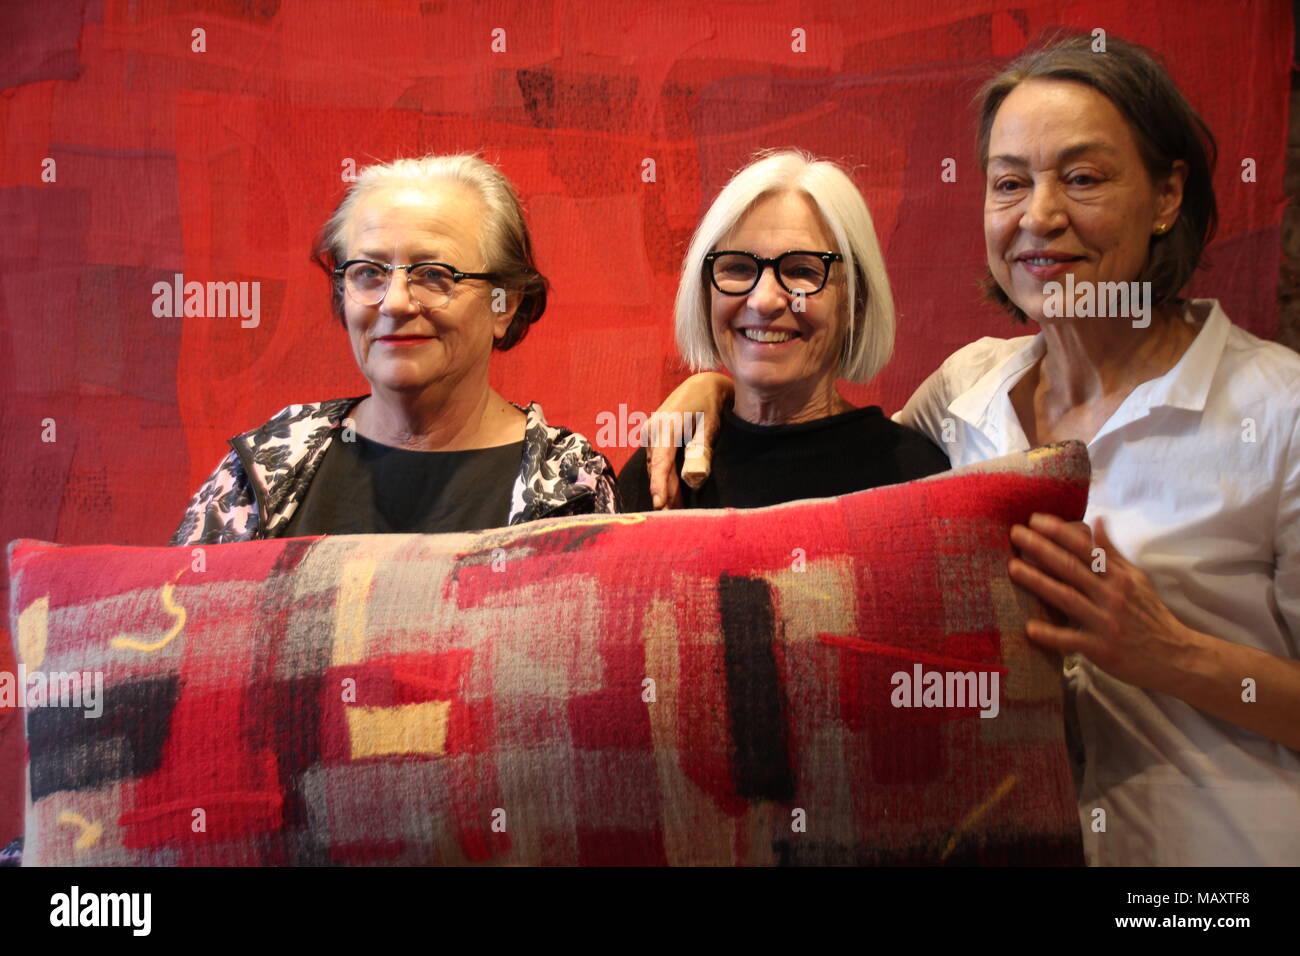 28 March 2018, US, New York: Designer Eileen Fisher (c) and project co-founders Lidewij Edelkoort (l) and Sigi Ahl present their programme 'DesignWork', which aims to turn discarded clothing into something new, whether it be pillows, bags or art. Discarded clothes make up 8% of the city's total waste. Photo: Christina Horsten/dpa Stock Photo